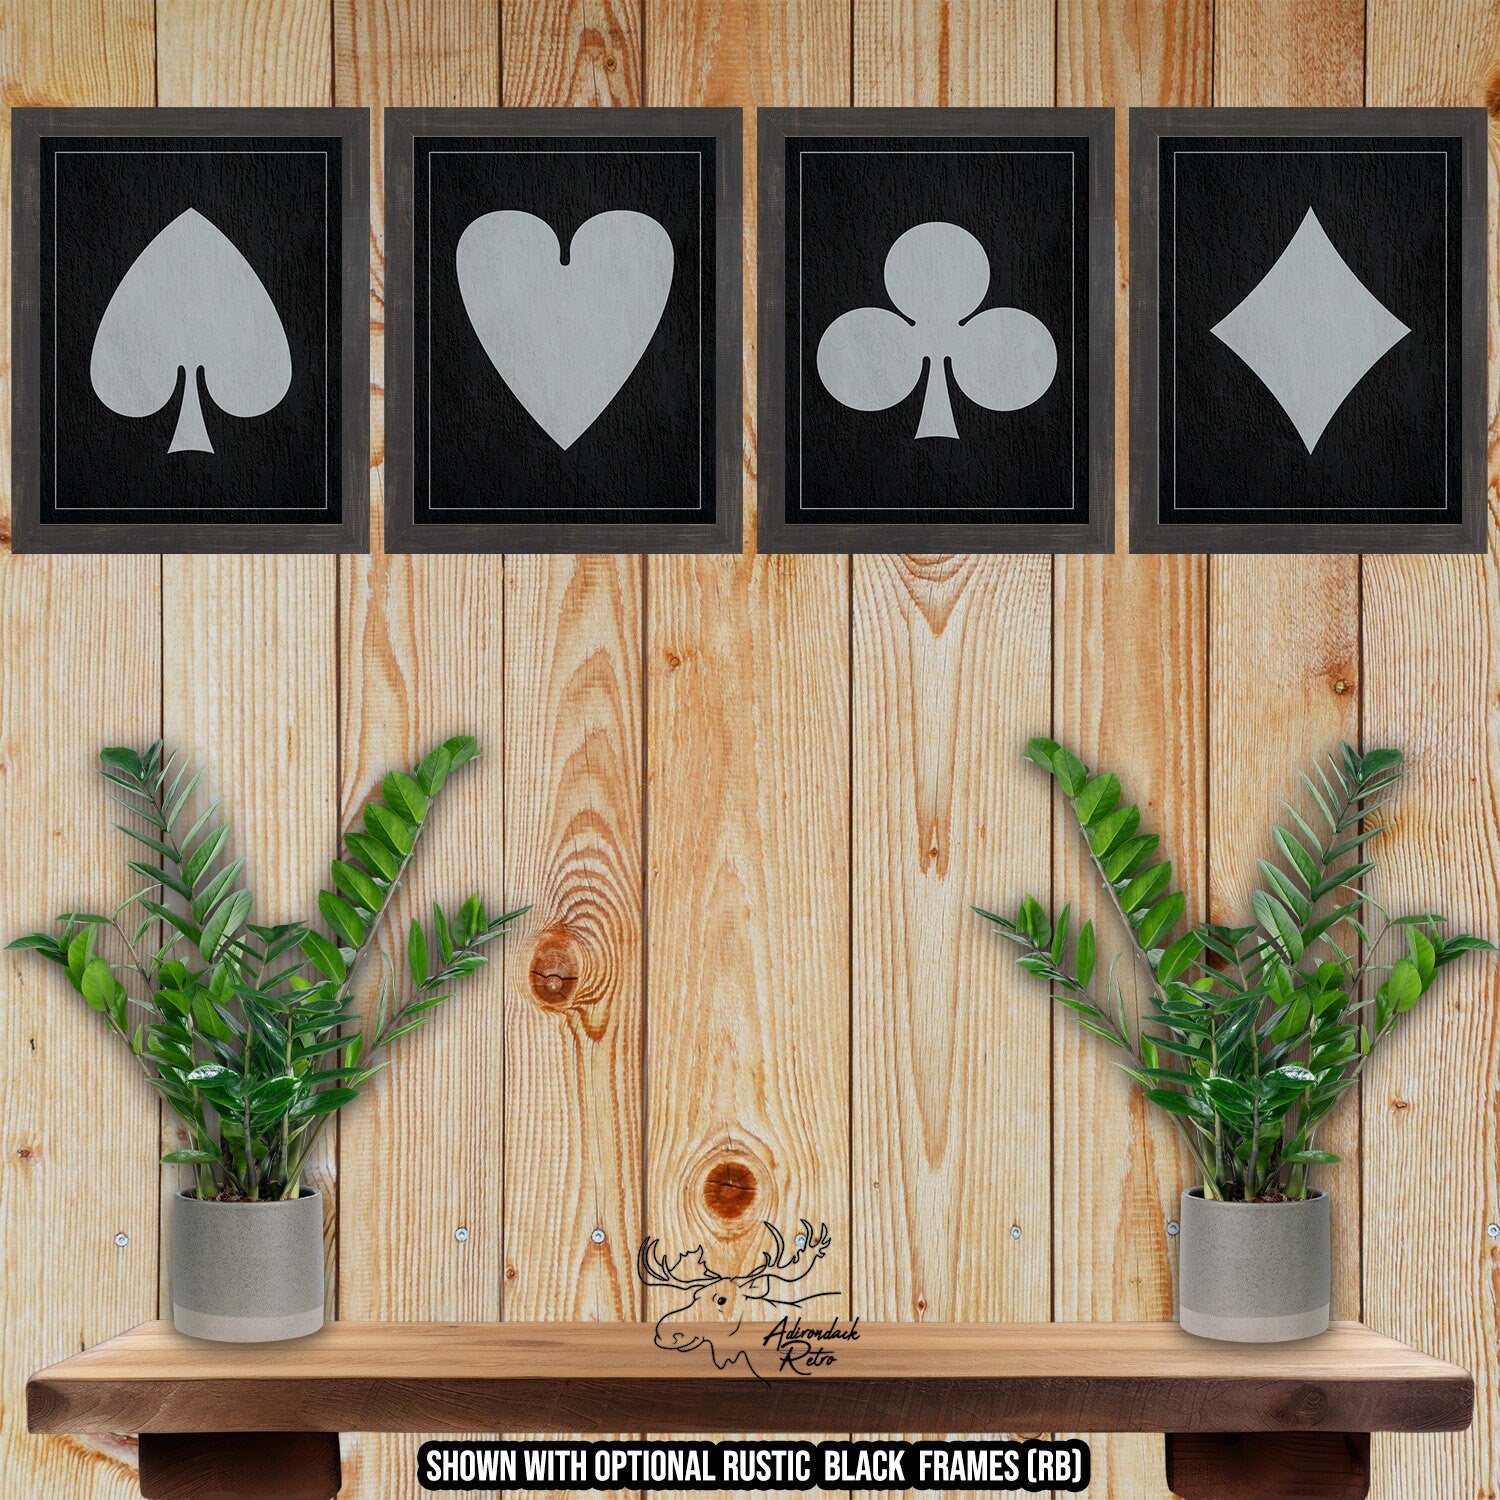 Four Poker Suits Set of Fine Art Prints - Black and Silver Playing Card Posters at Adirondack Retro